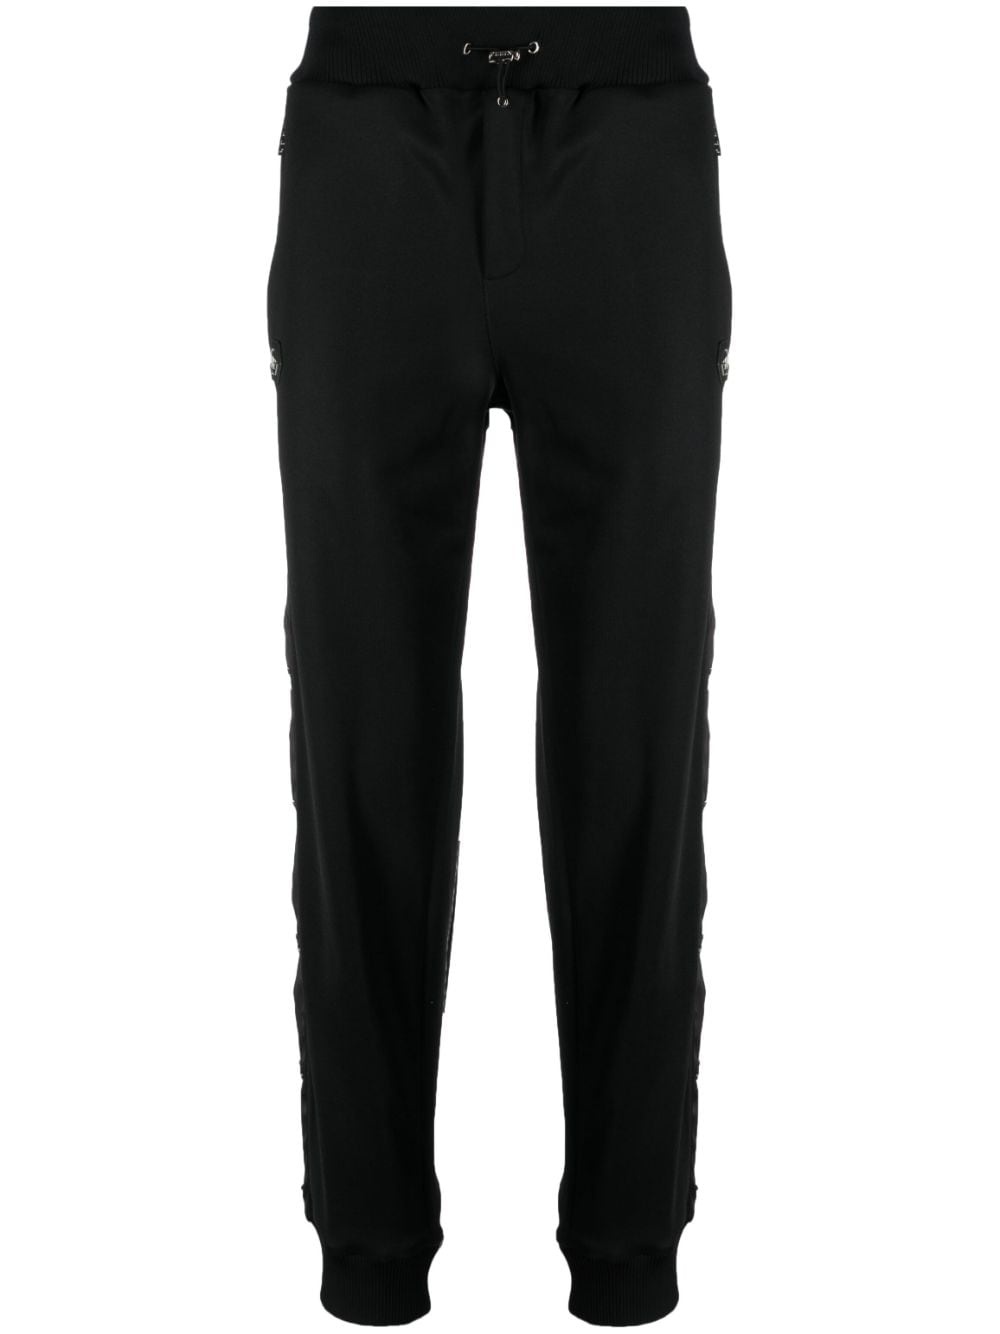 engraved-buttons drawstring track pants - 1